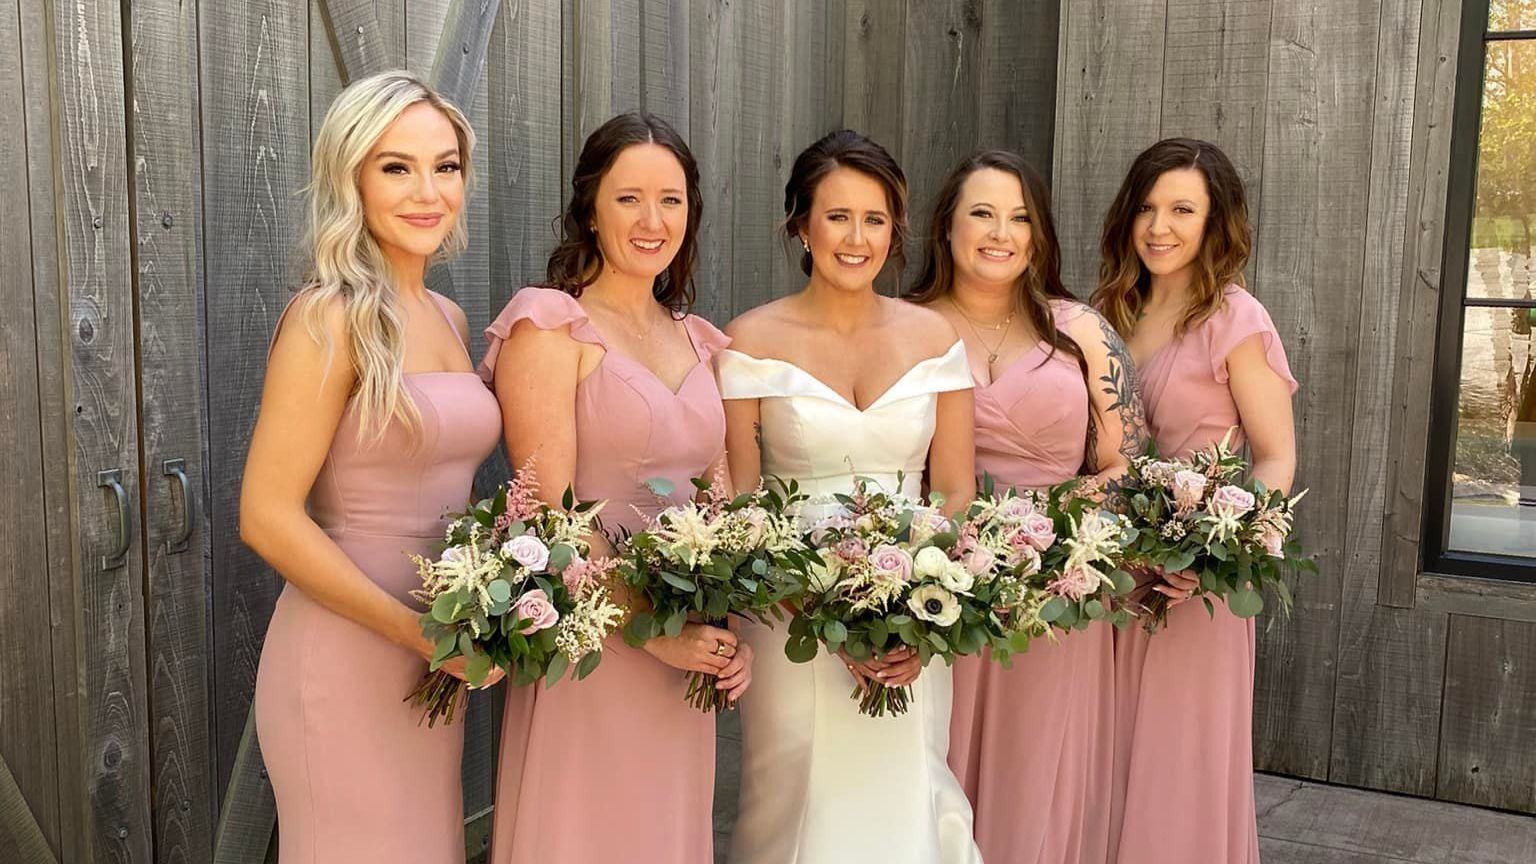 a bride and her bridesmaids are posing for a picture in front of a wooden building .